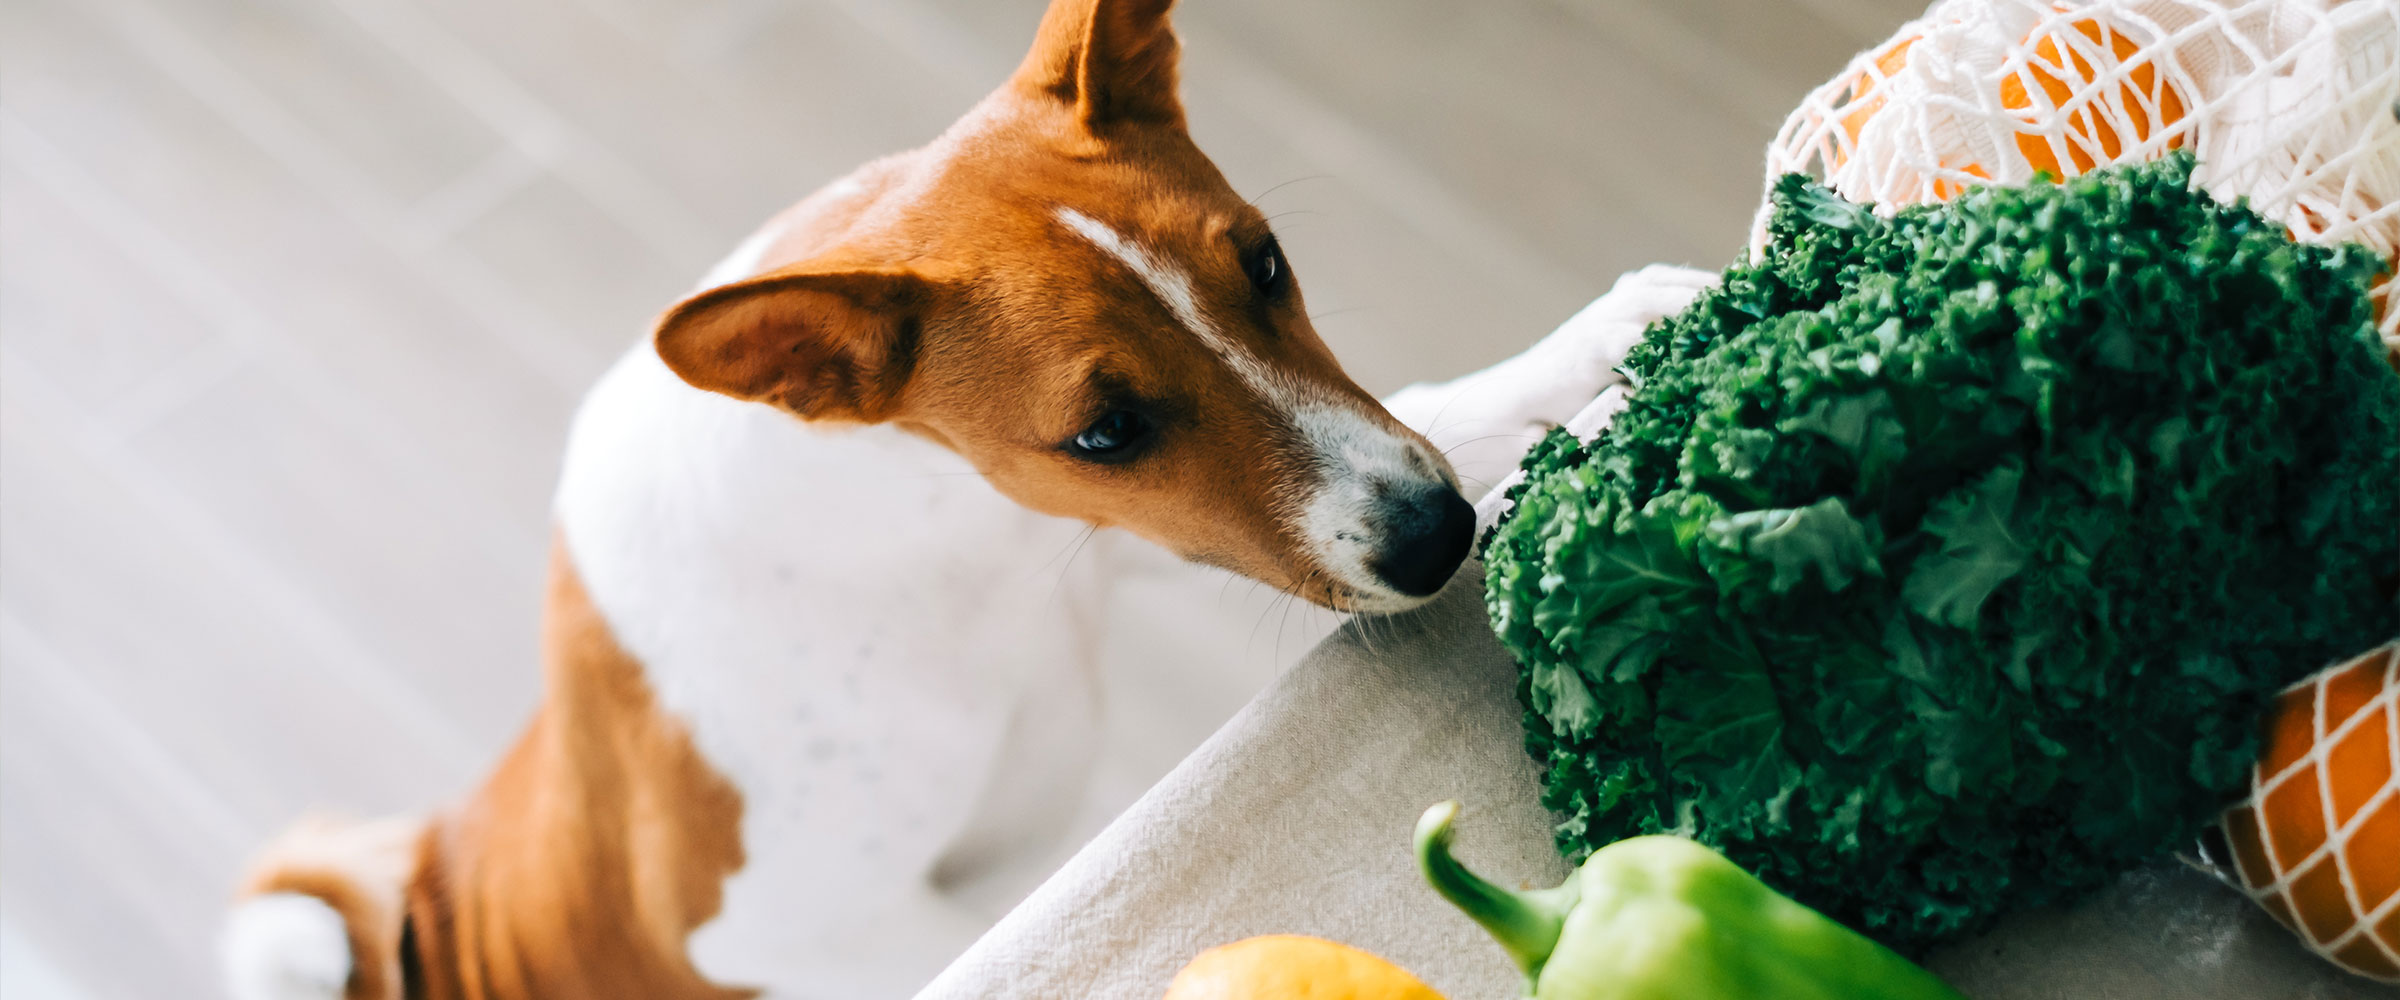 dog_and_parsley_3